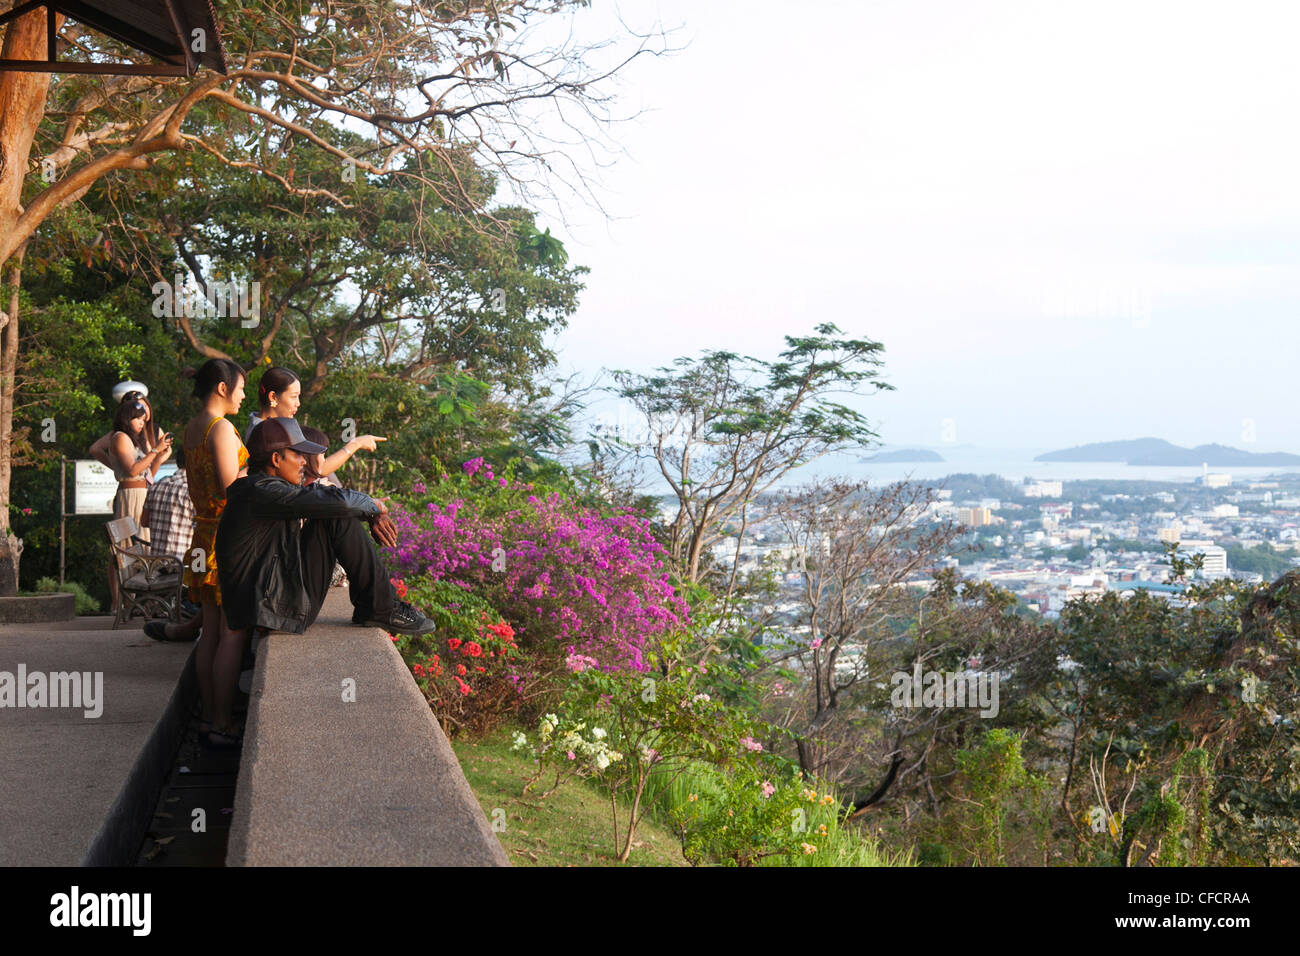 Thai people enjoying the view from Rong Hill over the city at sunset, Phuket, Thailand, Asia Stock Photo